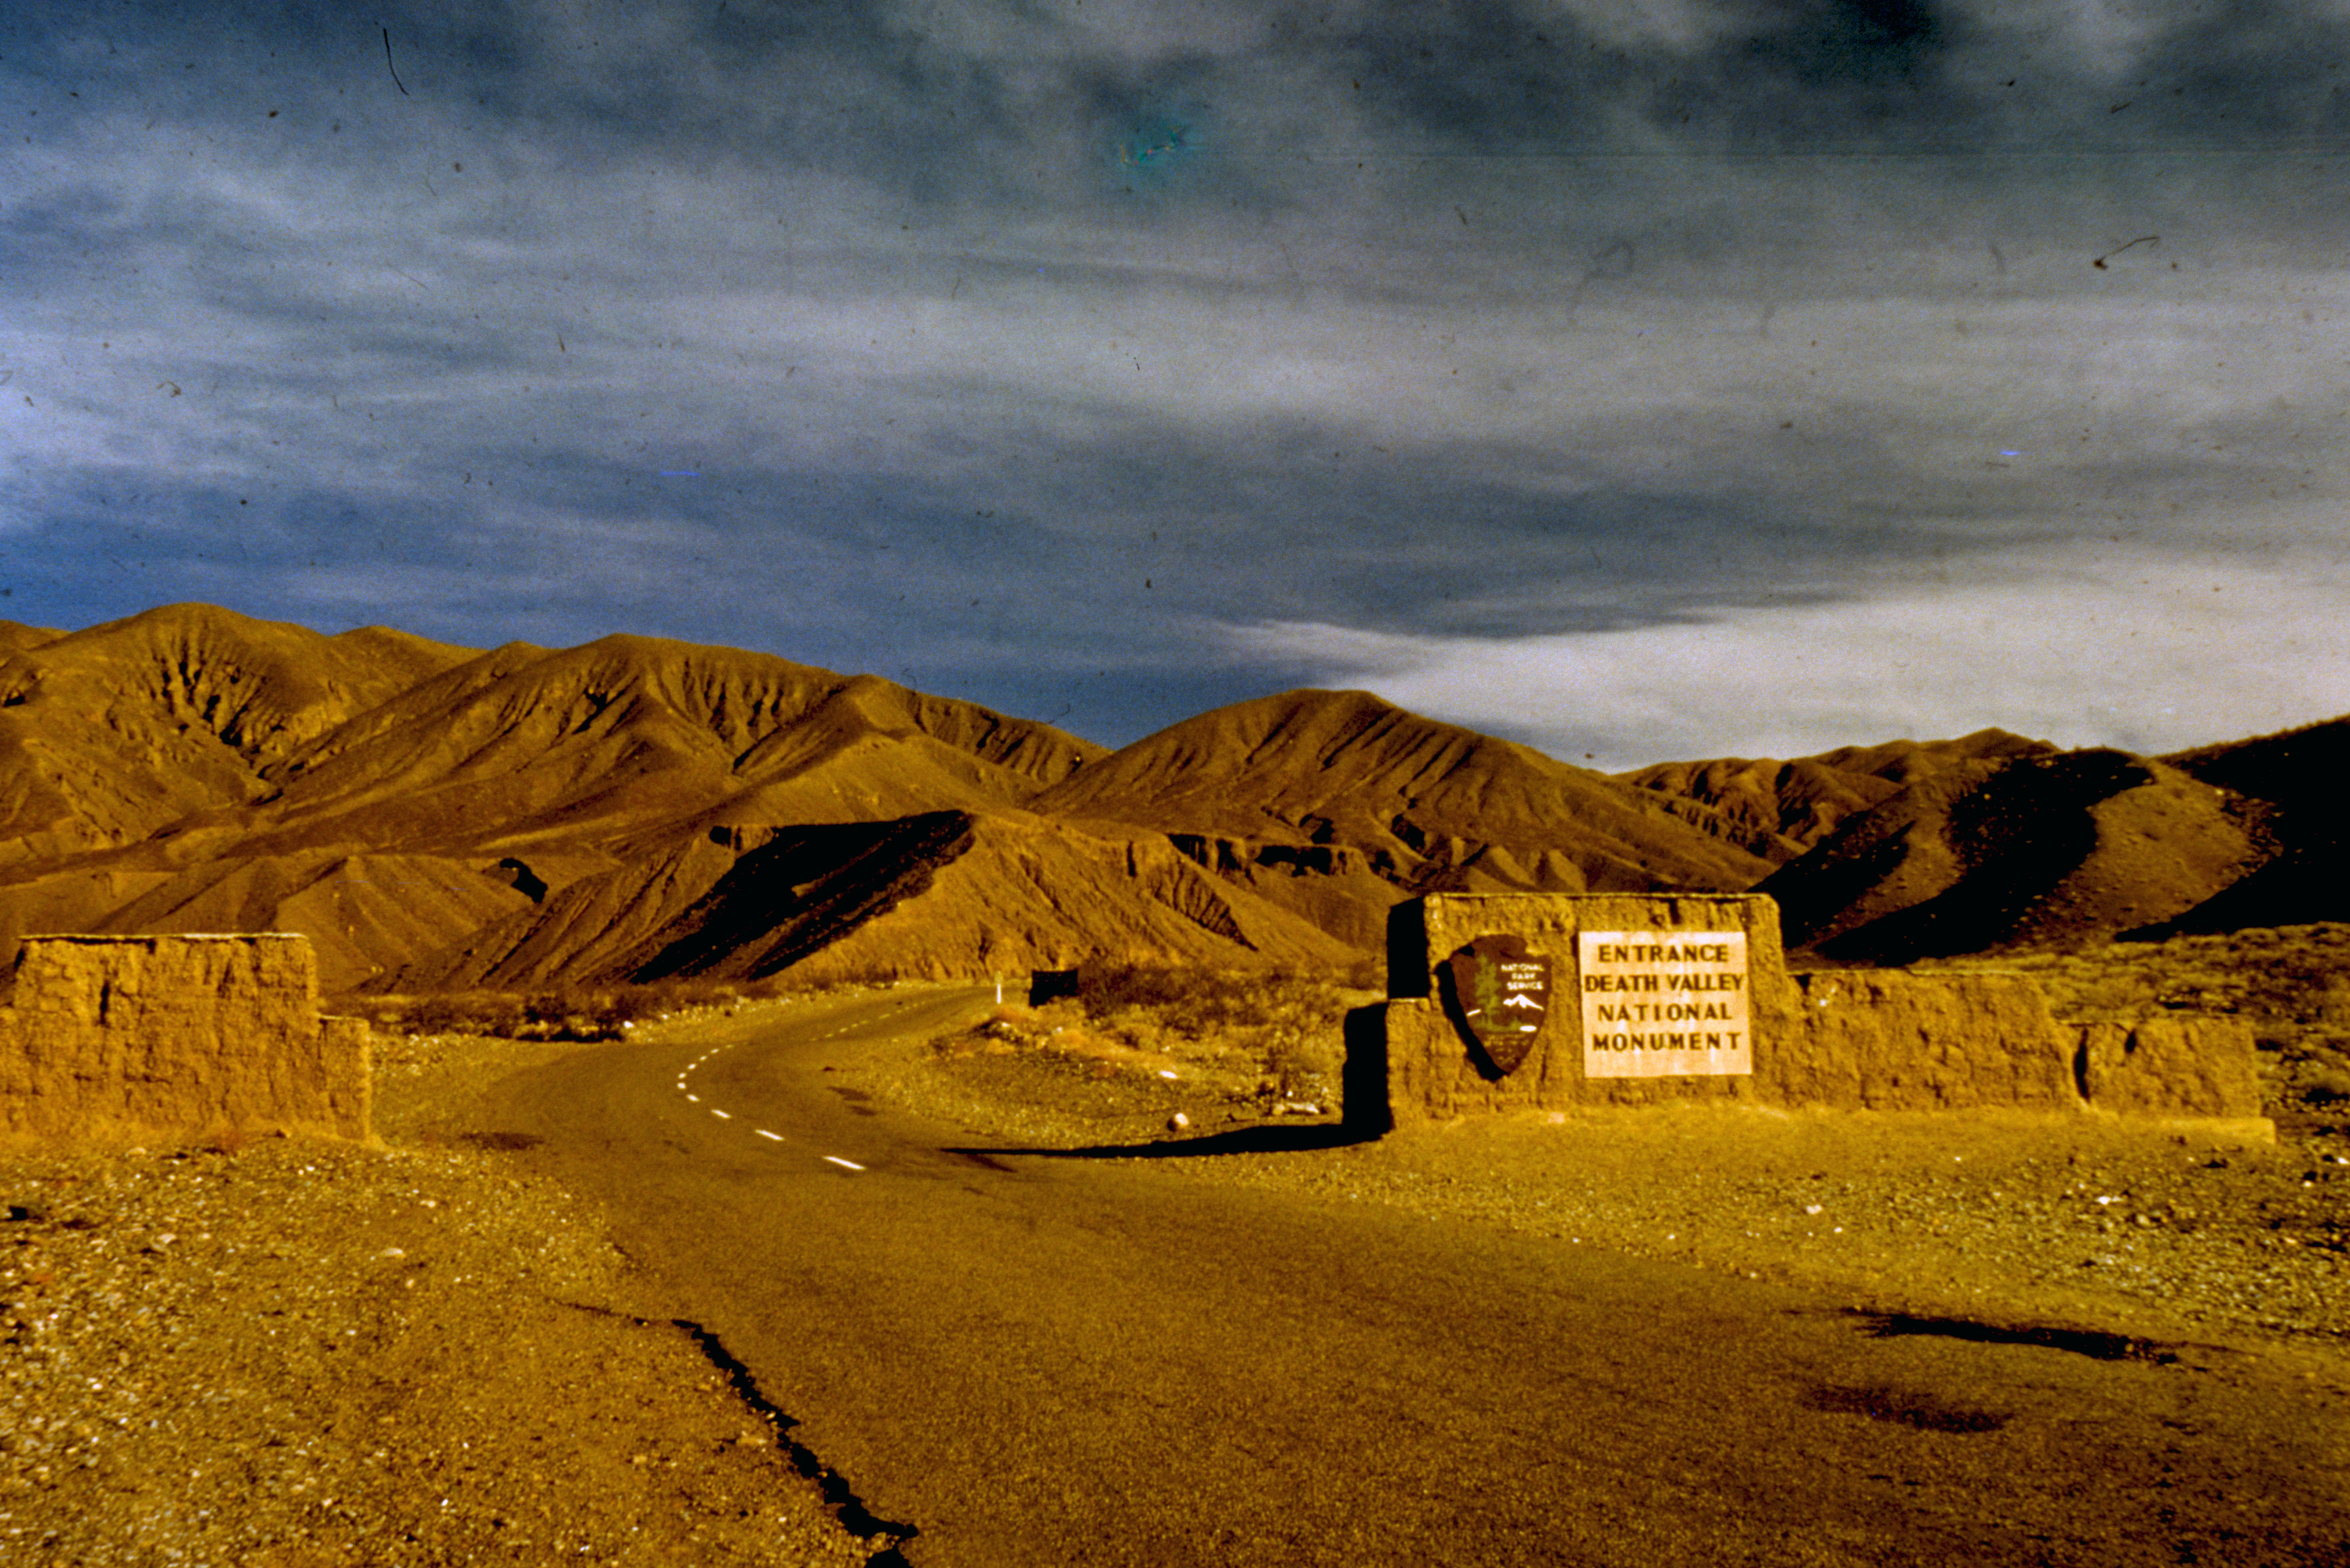 An adobe wall about 5ft tall on both sides of a paved road leading toward desert hills. There is a brown Park Service arrowhead on the wall on the right, with a sign to its right reading "Entrance Death Valley National Monument"